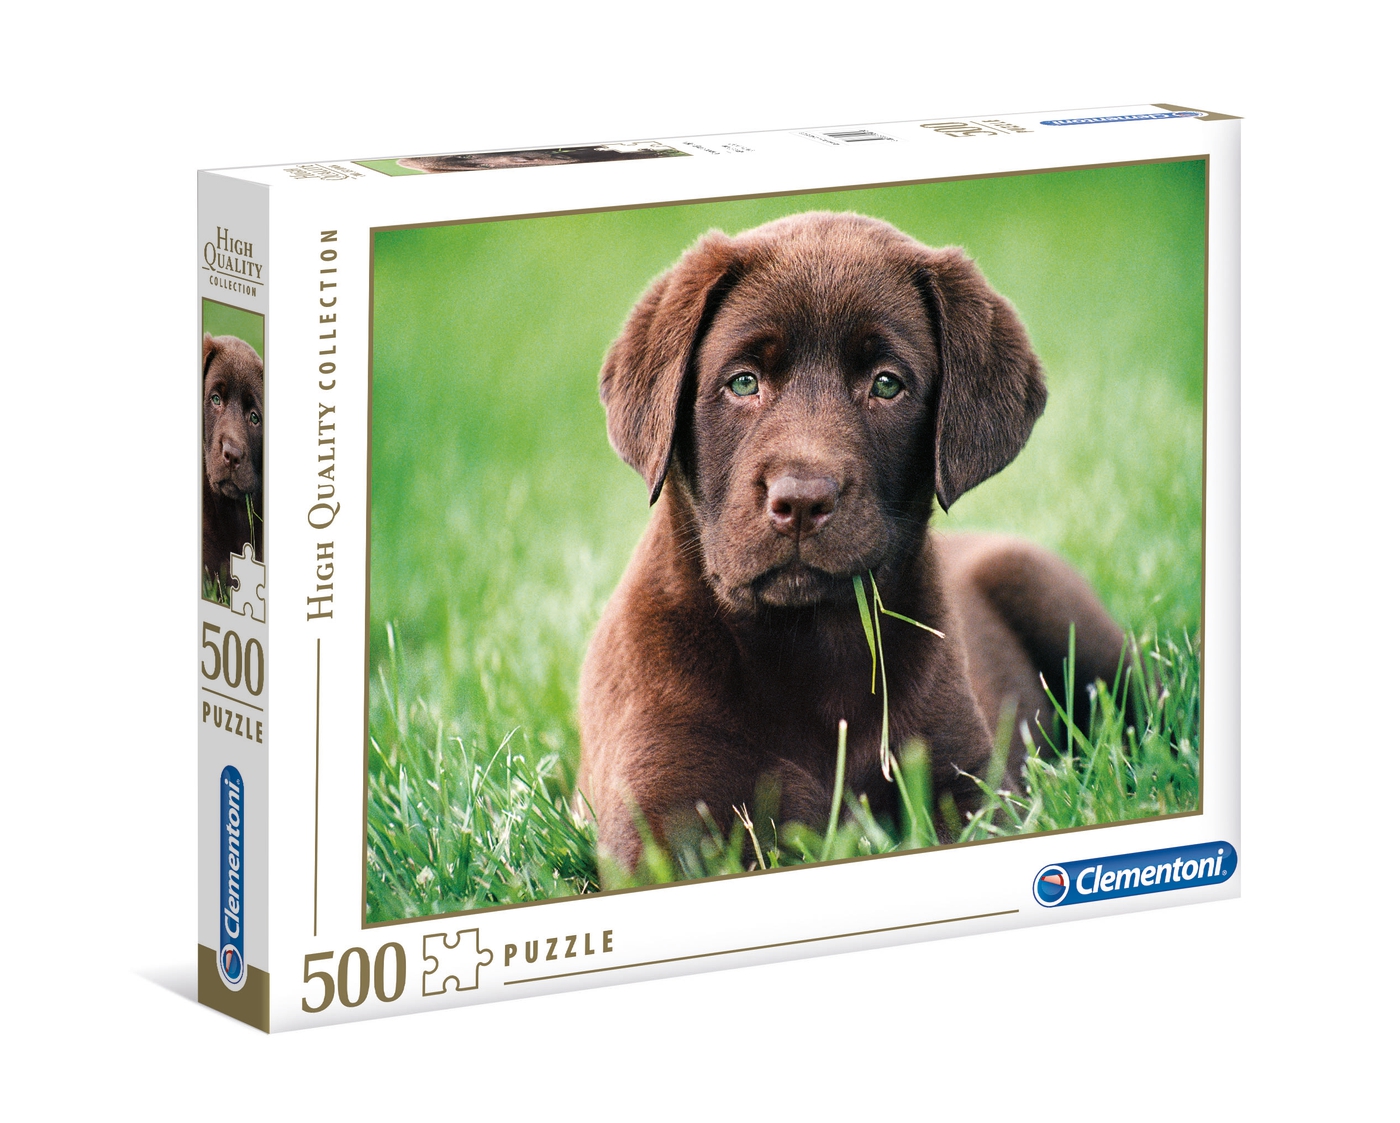 Clementoni Chocolate Puppy High Quality Jigsaw Puzzle 500 Pieces 